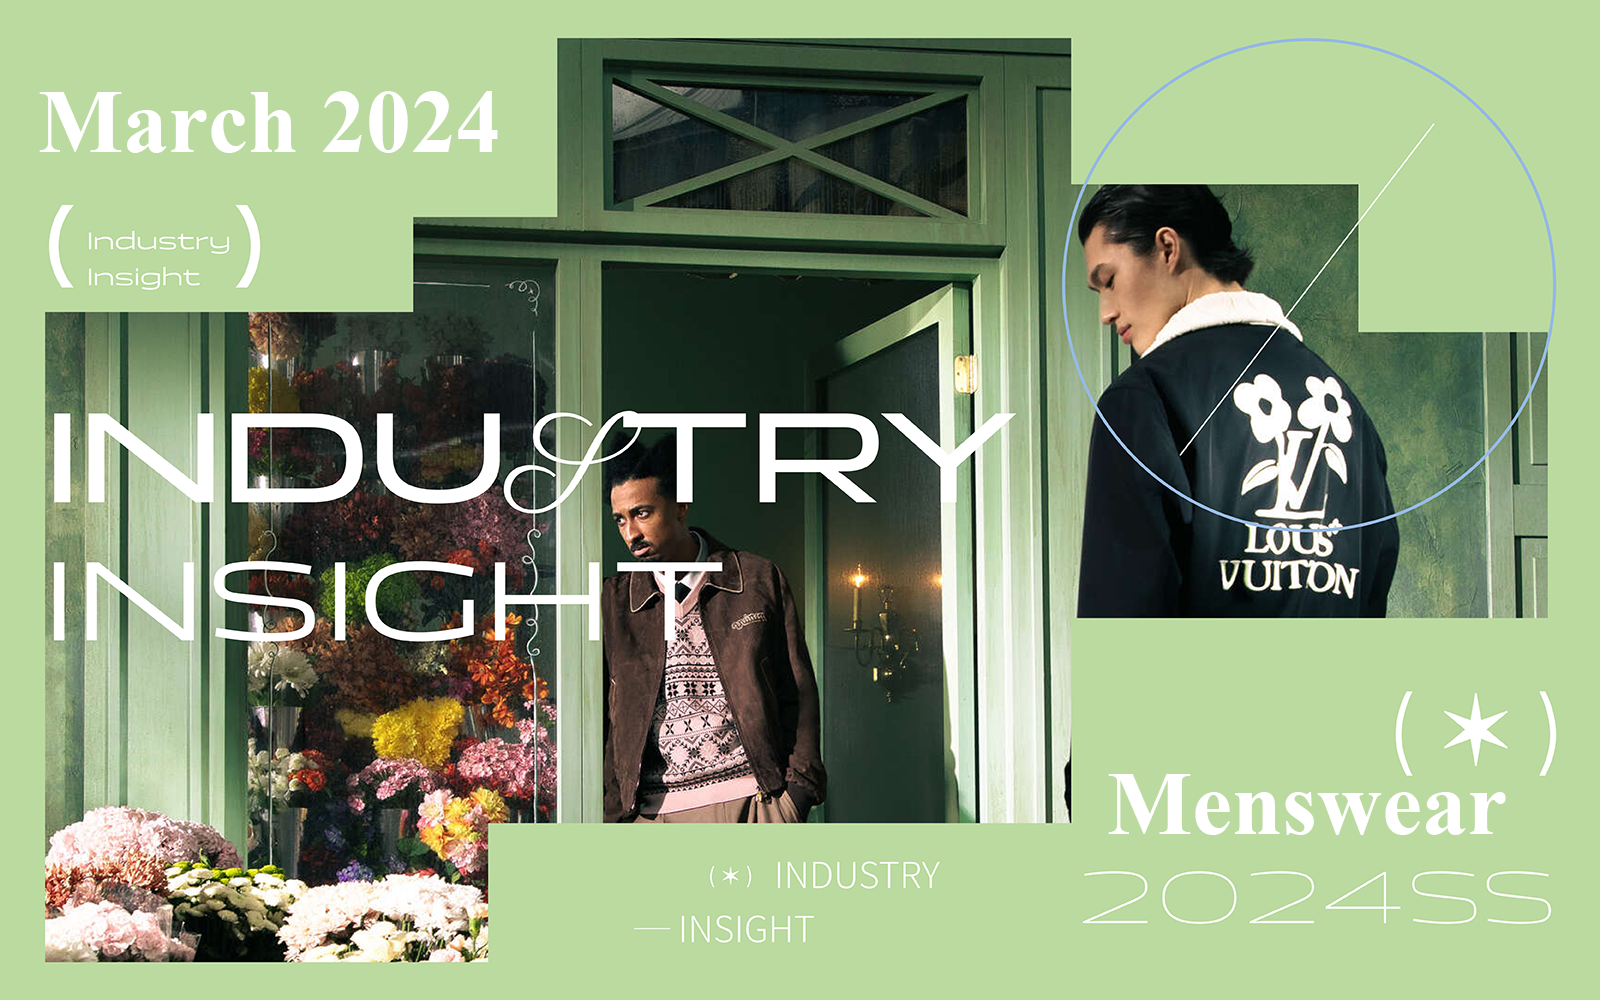 March 2024 -- The Industry Insight of Menswear